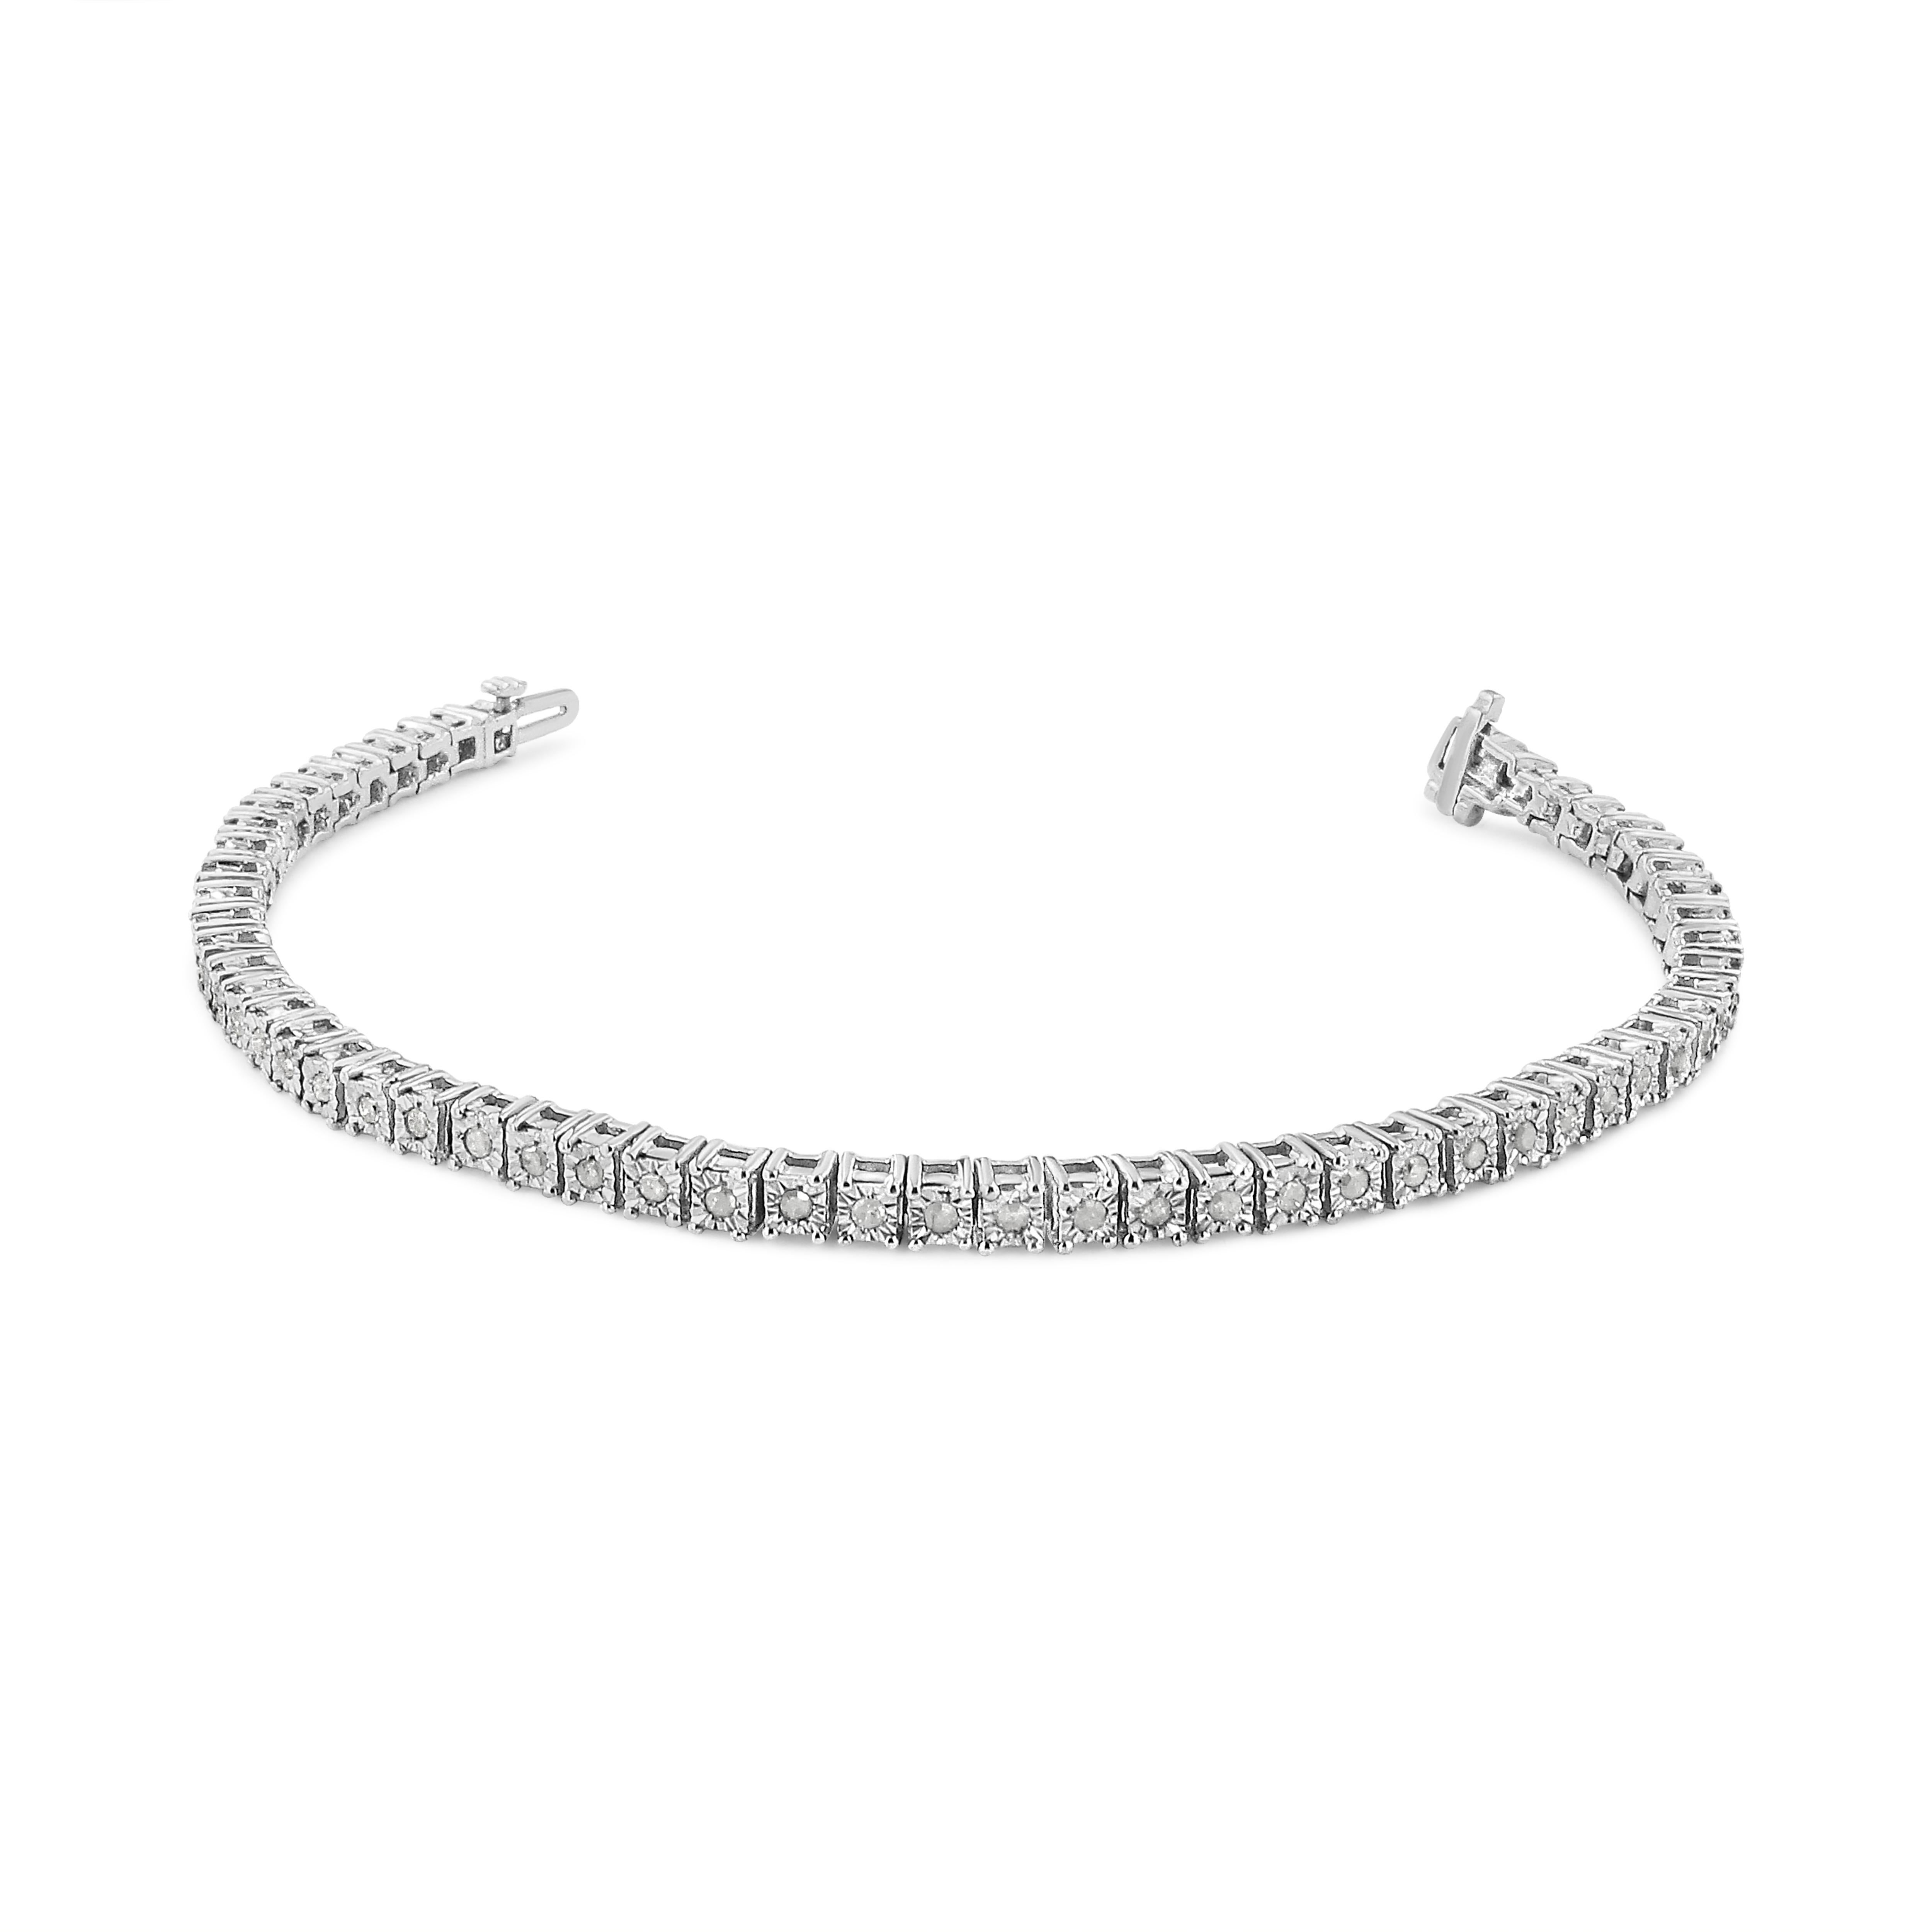 This feminine and glamorous tennis bracelet is made up of the most lovely, multifaceted rose cut diamonds, reminiscent of vintage-era Art Deco jewelry style. Set in square links of real, solid .925 sterling silver for a timeless look, in your choice